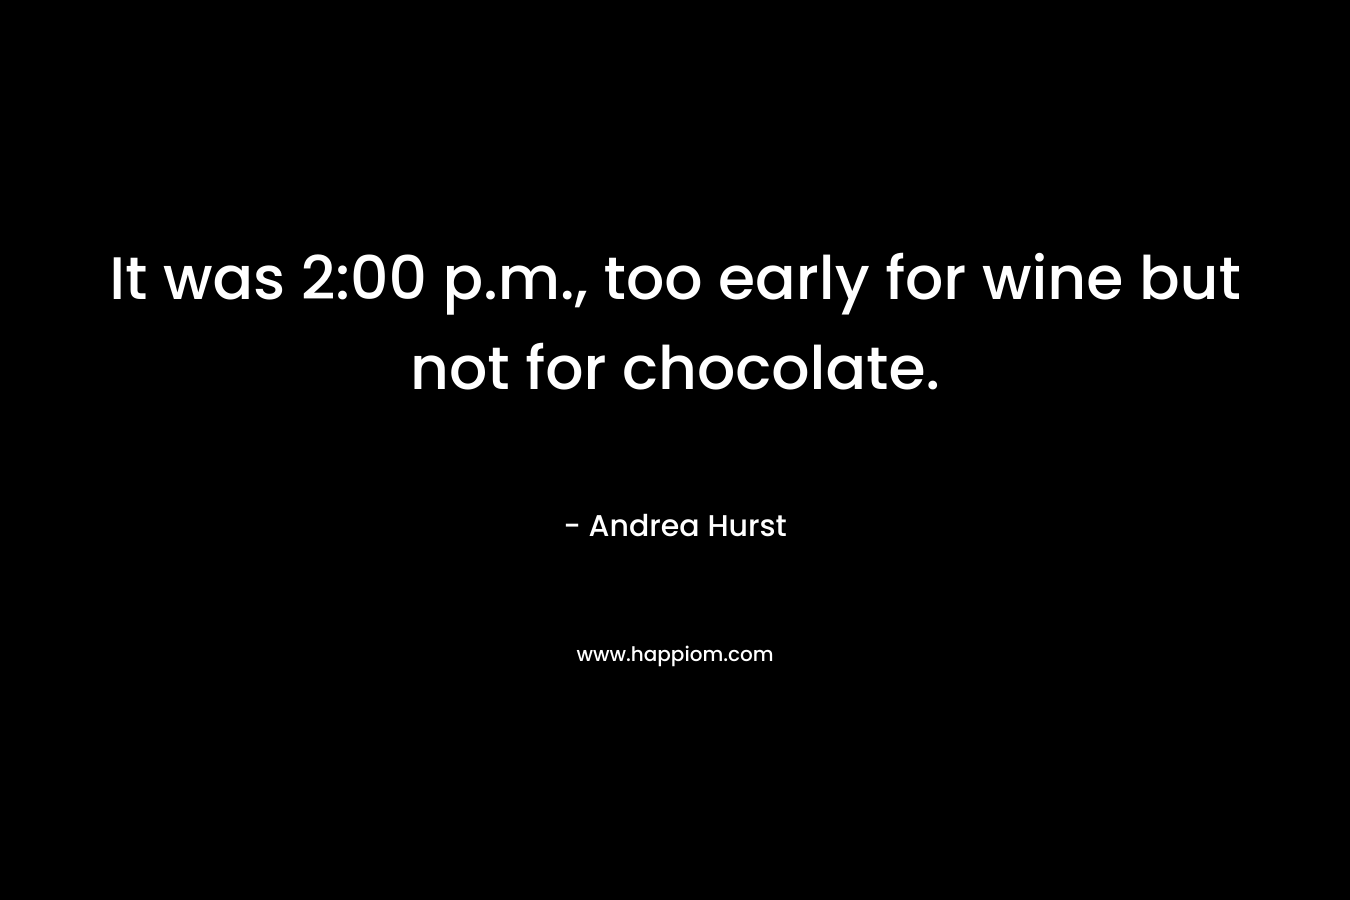 It was 2:00 p.m., too early for wine but not for chocolate.